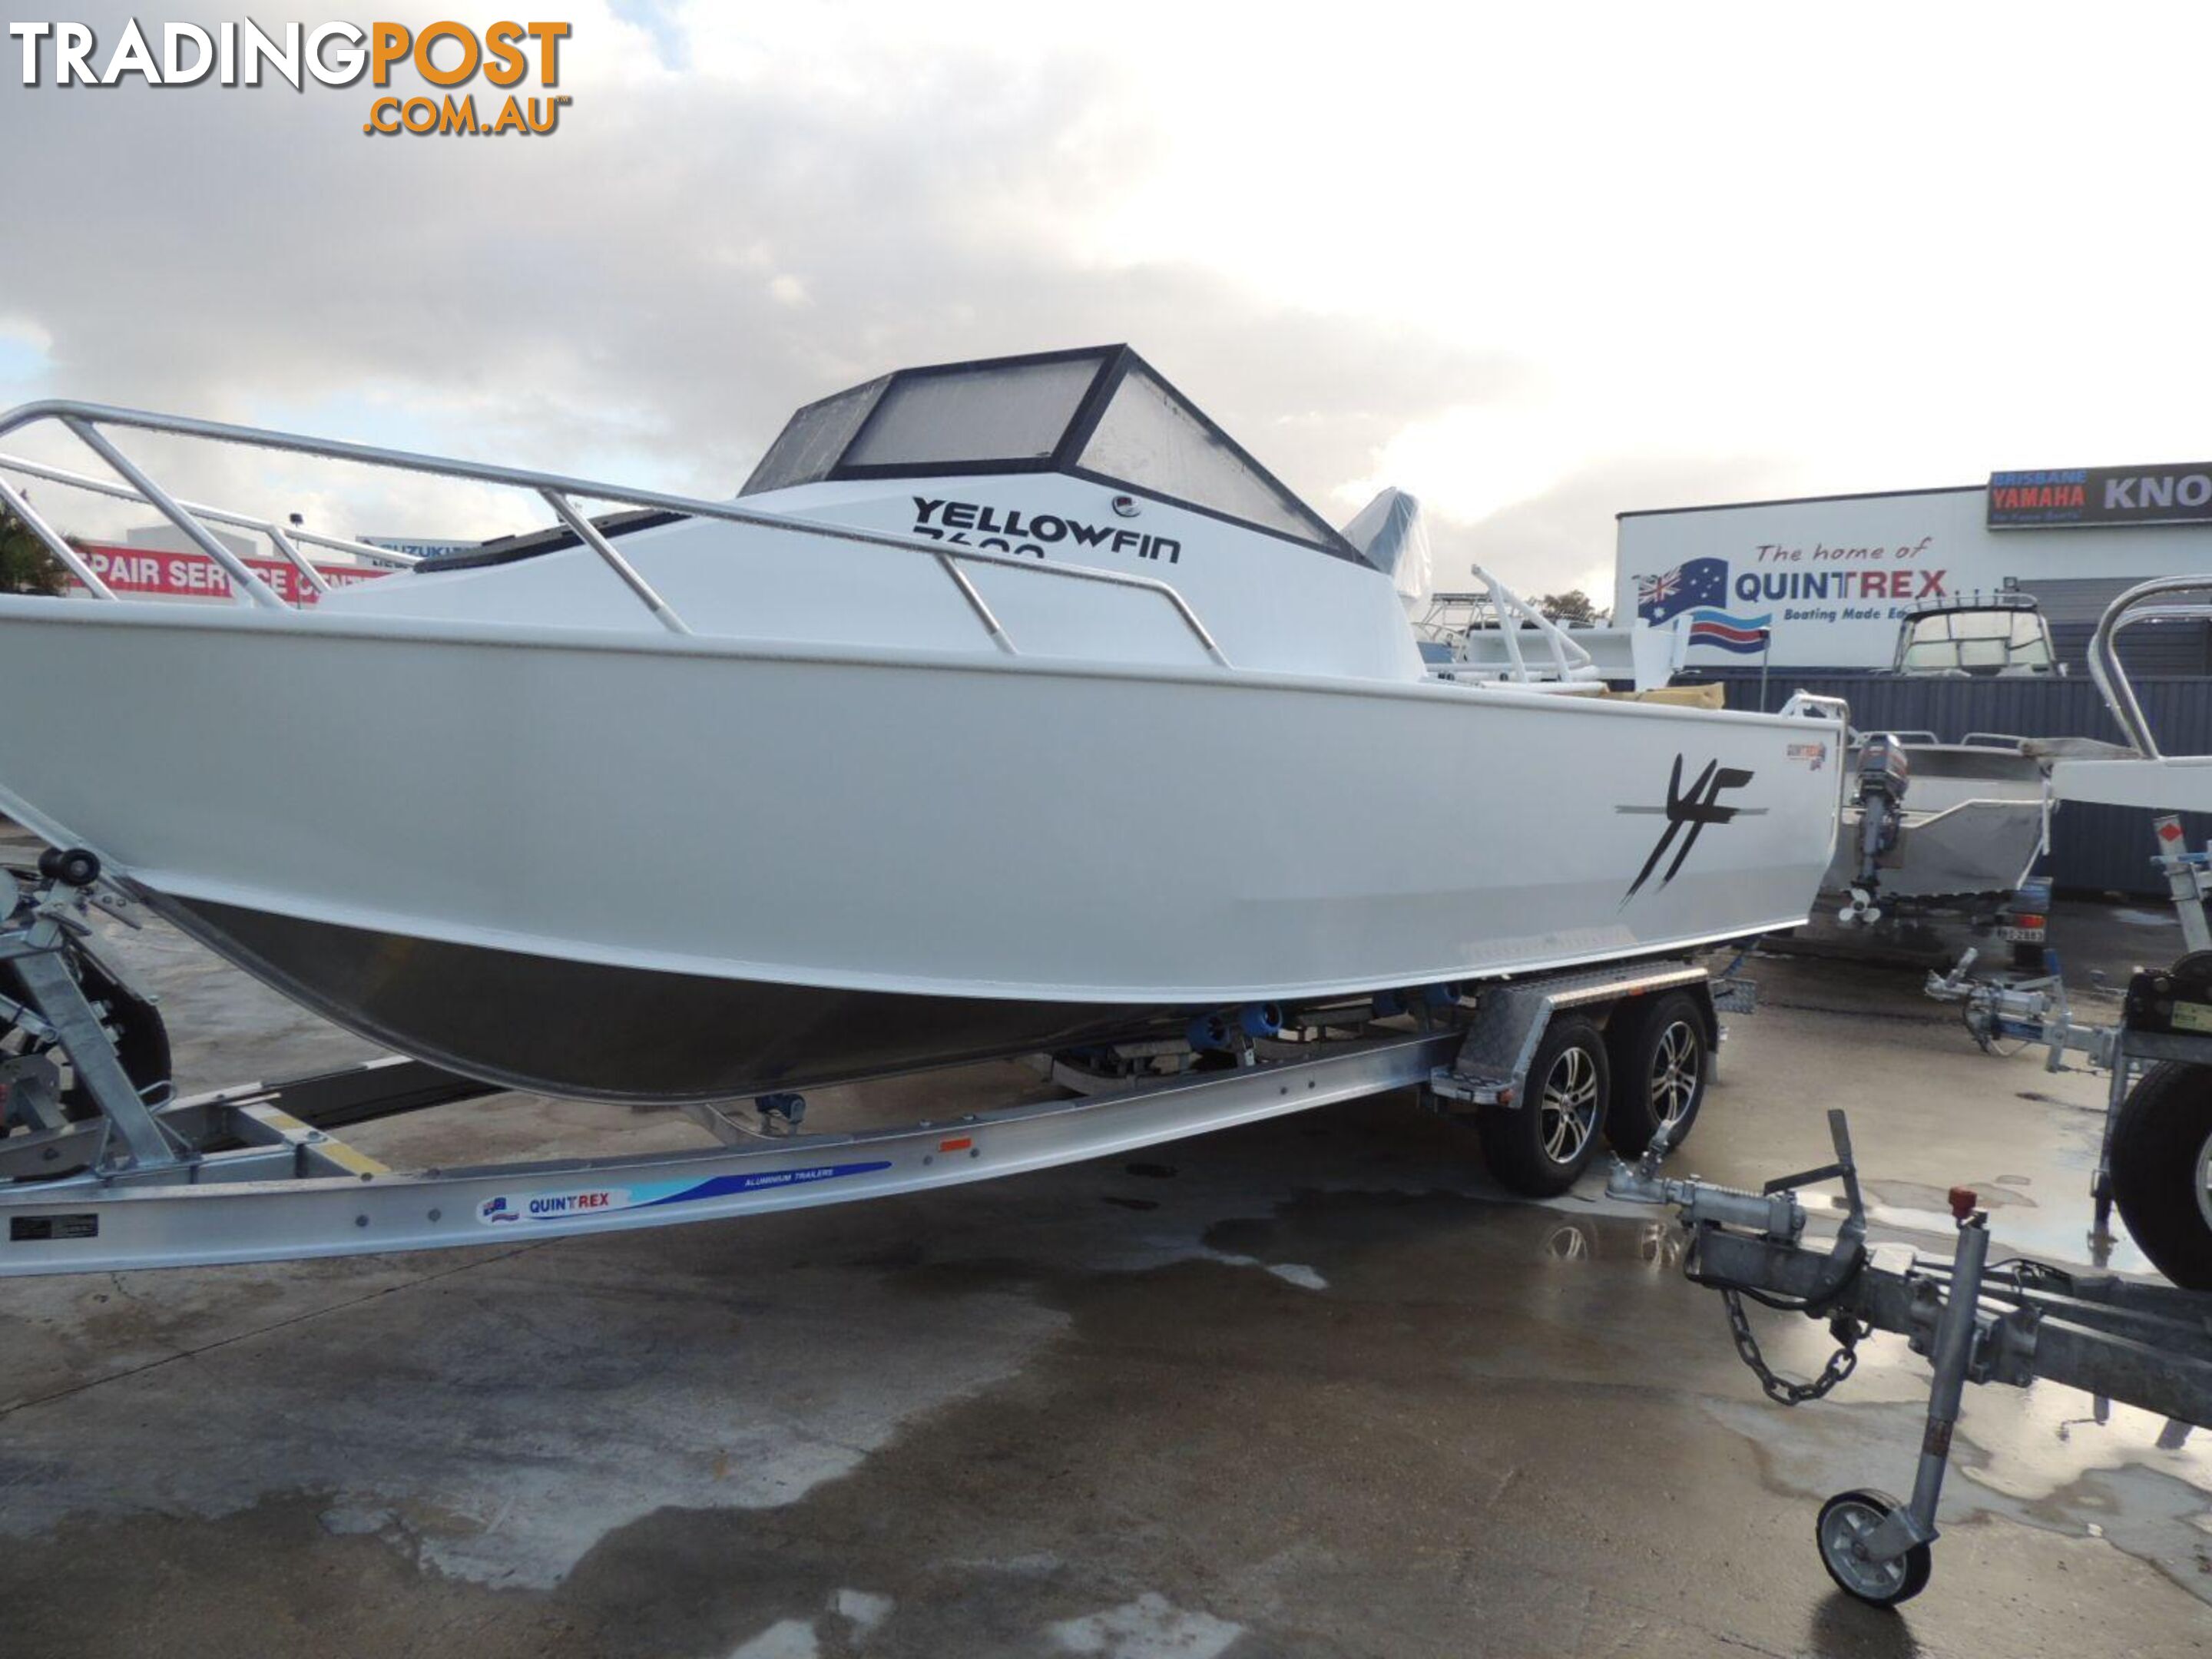 Yellowfin 7600 Soft Top Cabin + Yamaha F300hp 4-Stroke - Platinum Pack for sale online prices